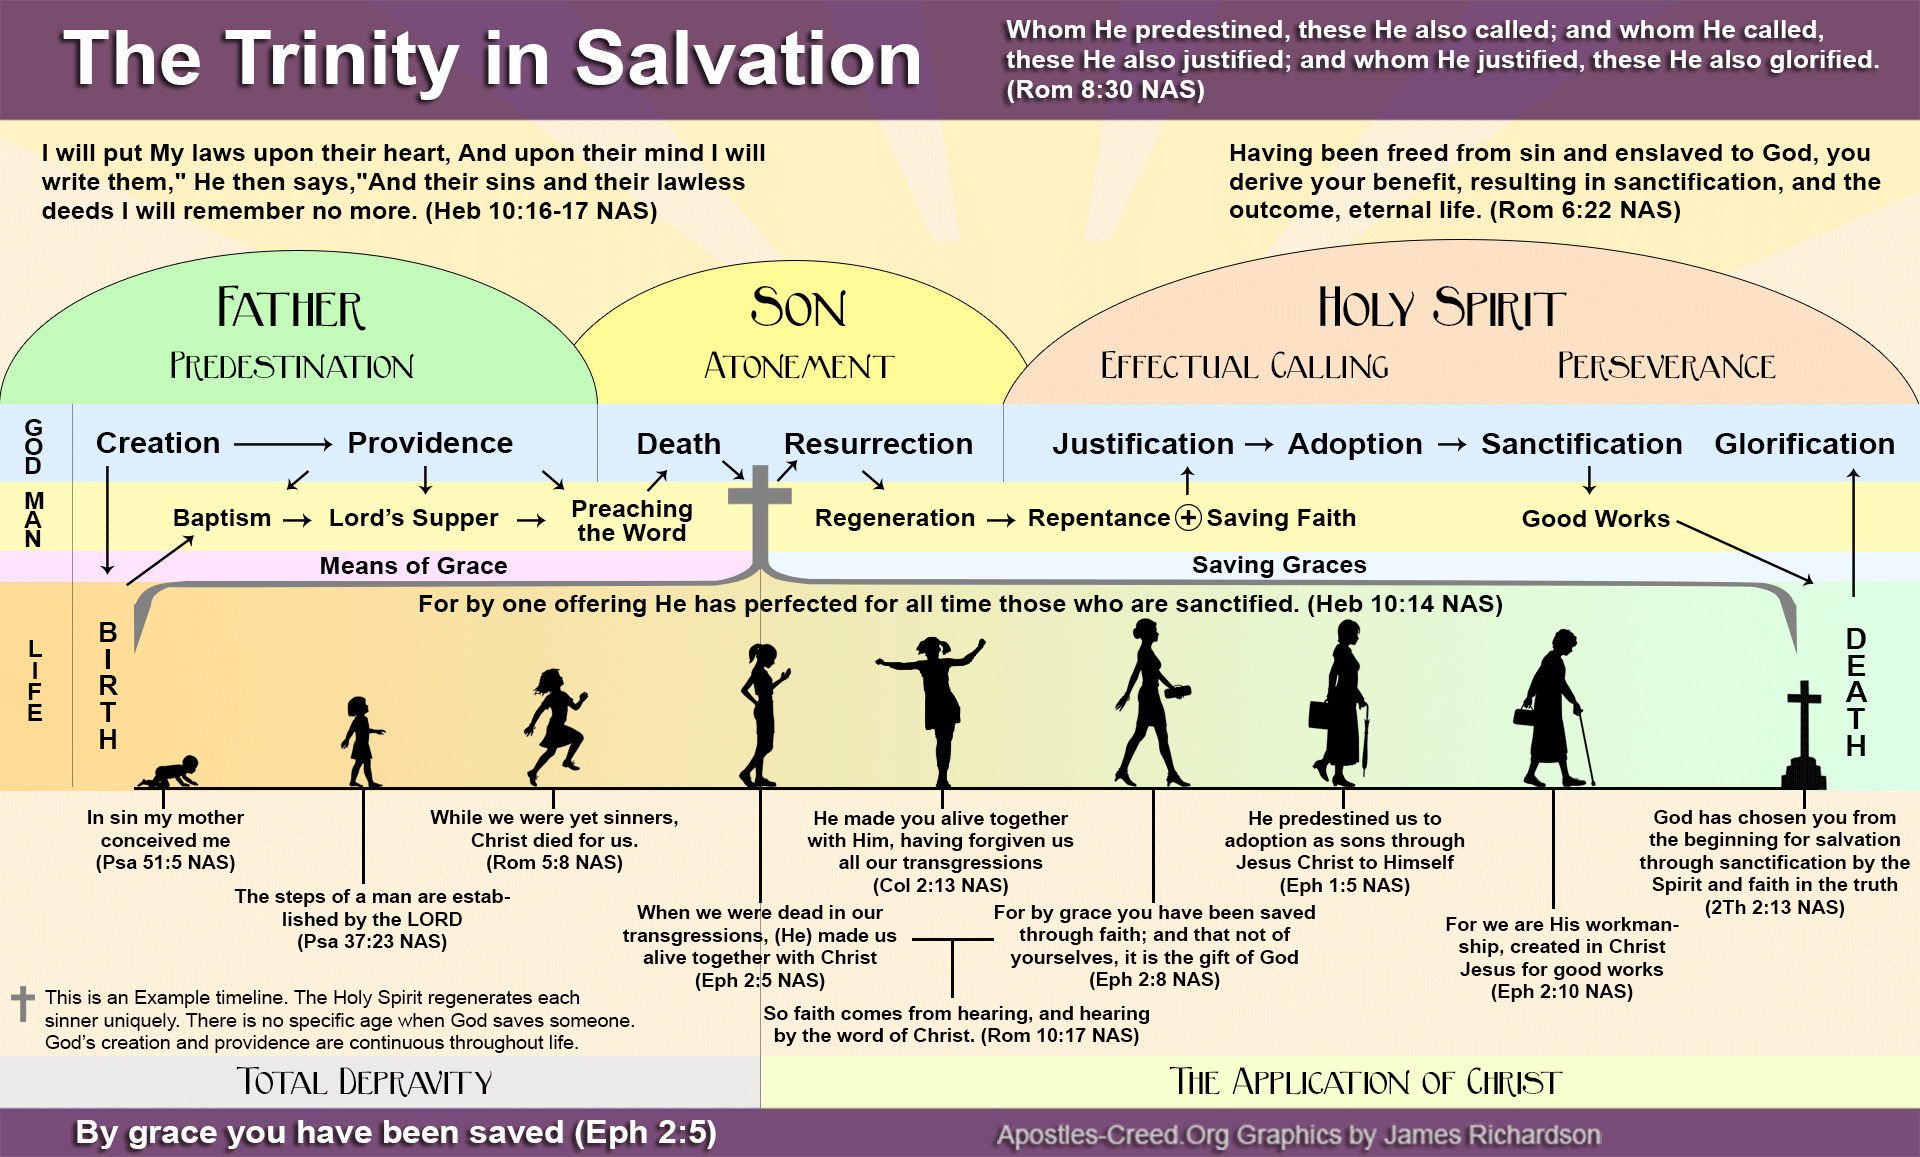 infographic-the-trinity-in-salvation-the-means-of-grace-and-saving-graces-apostles-creed